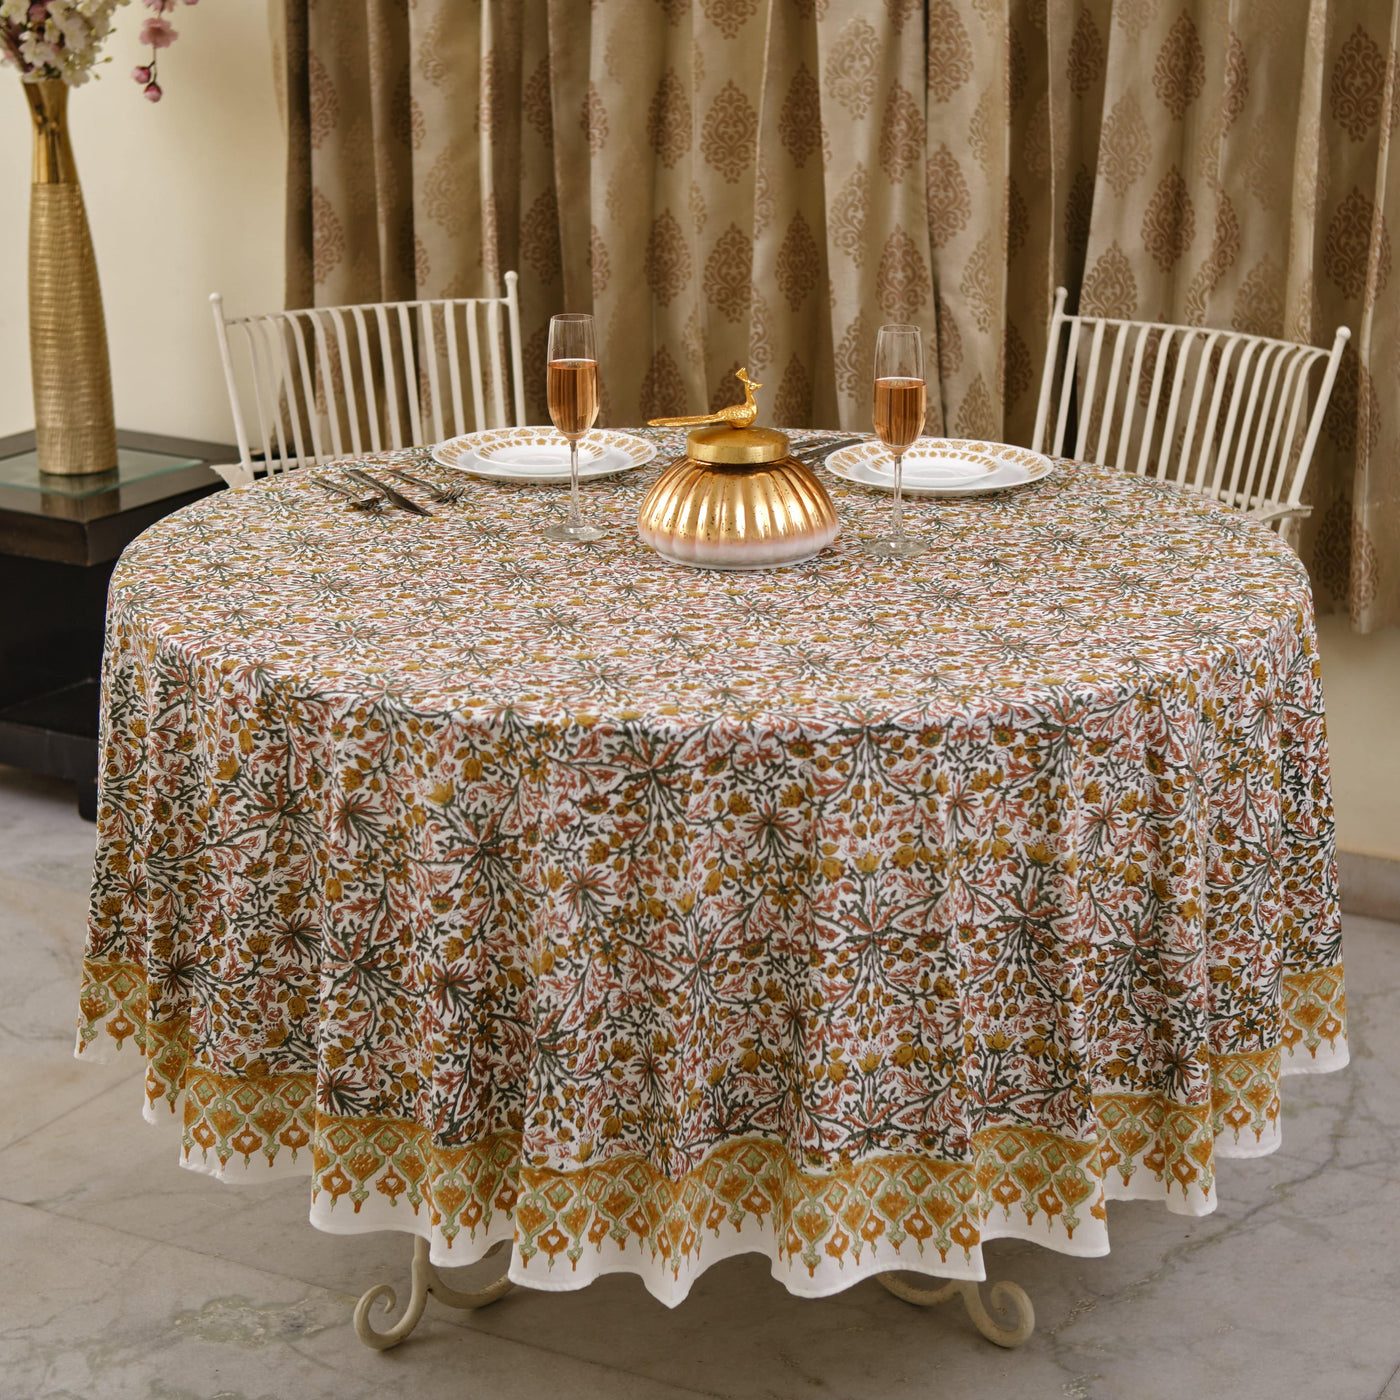 LF table linen Imogen Round Cotton Tablecloth Table Cover (With Optional Napkins)